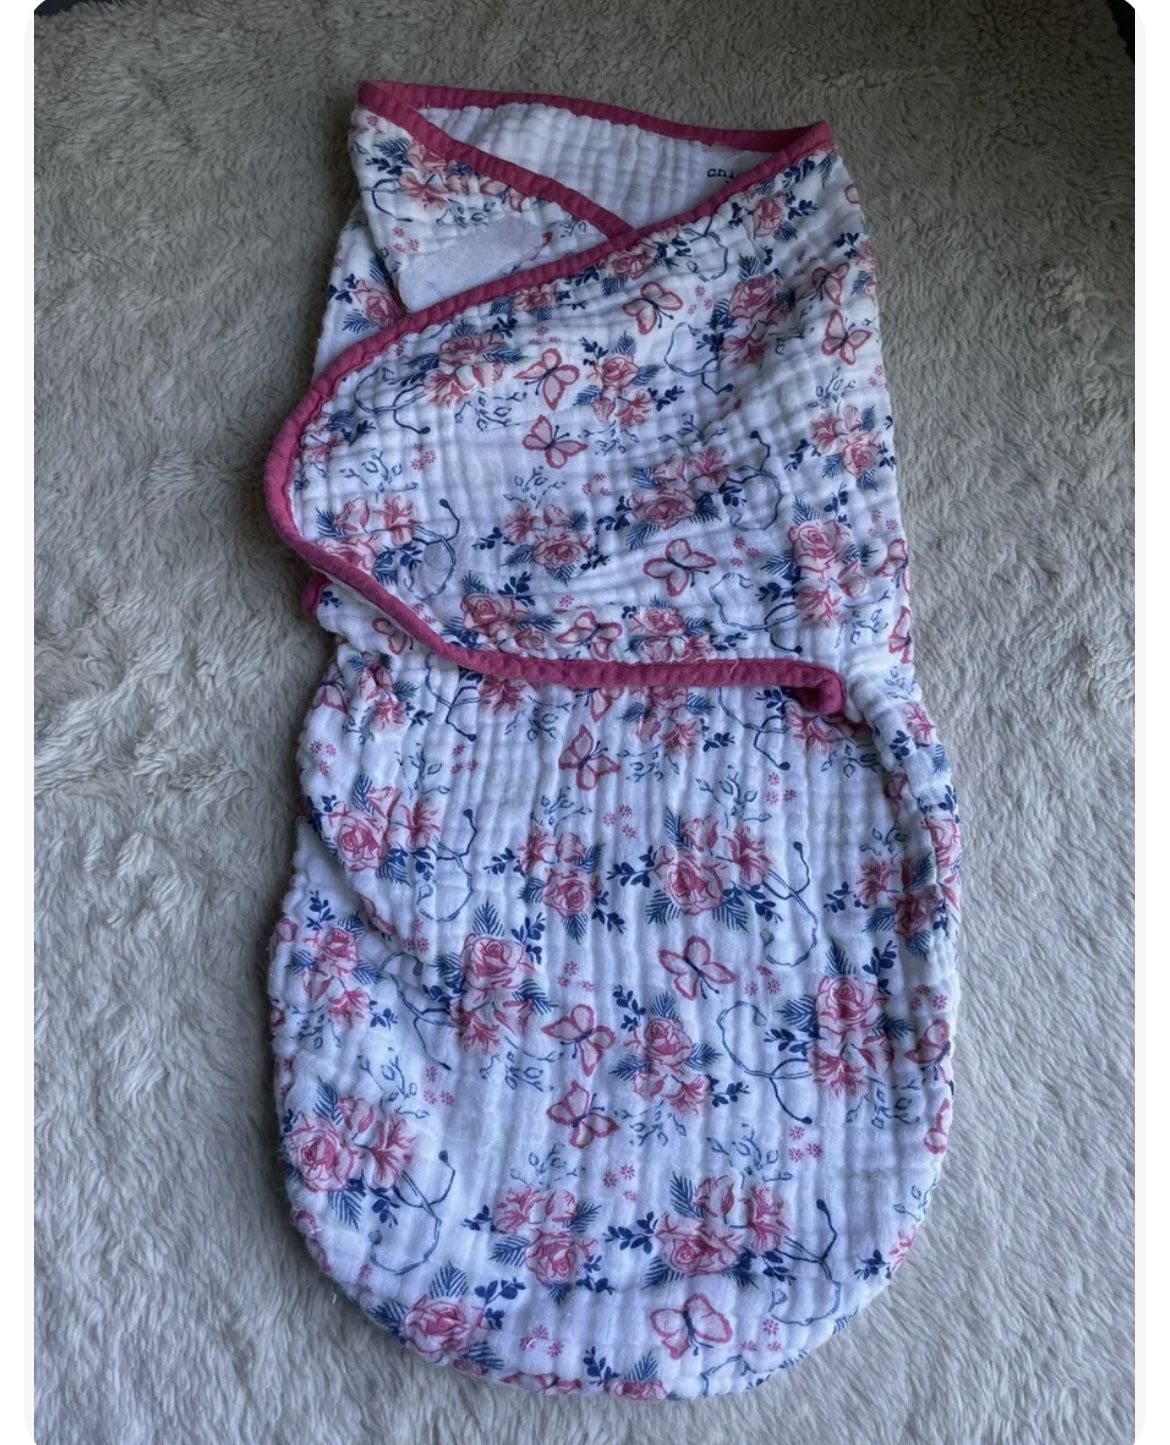 Chick Pea Muslin Cloth Floral Sleepsack Swaddle Cotton Blanket 0-3M Baby Girls